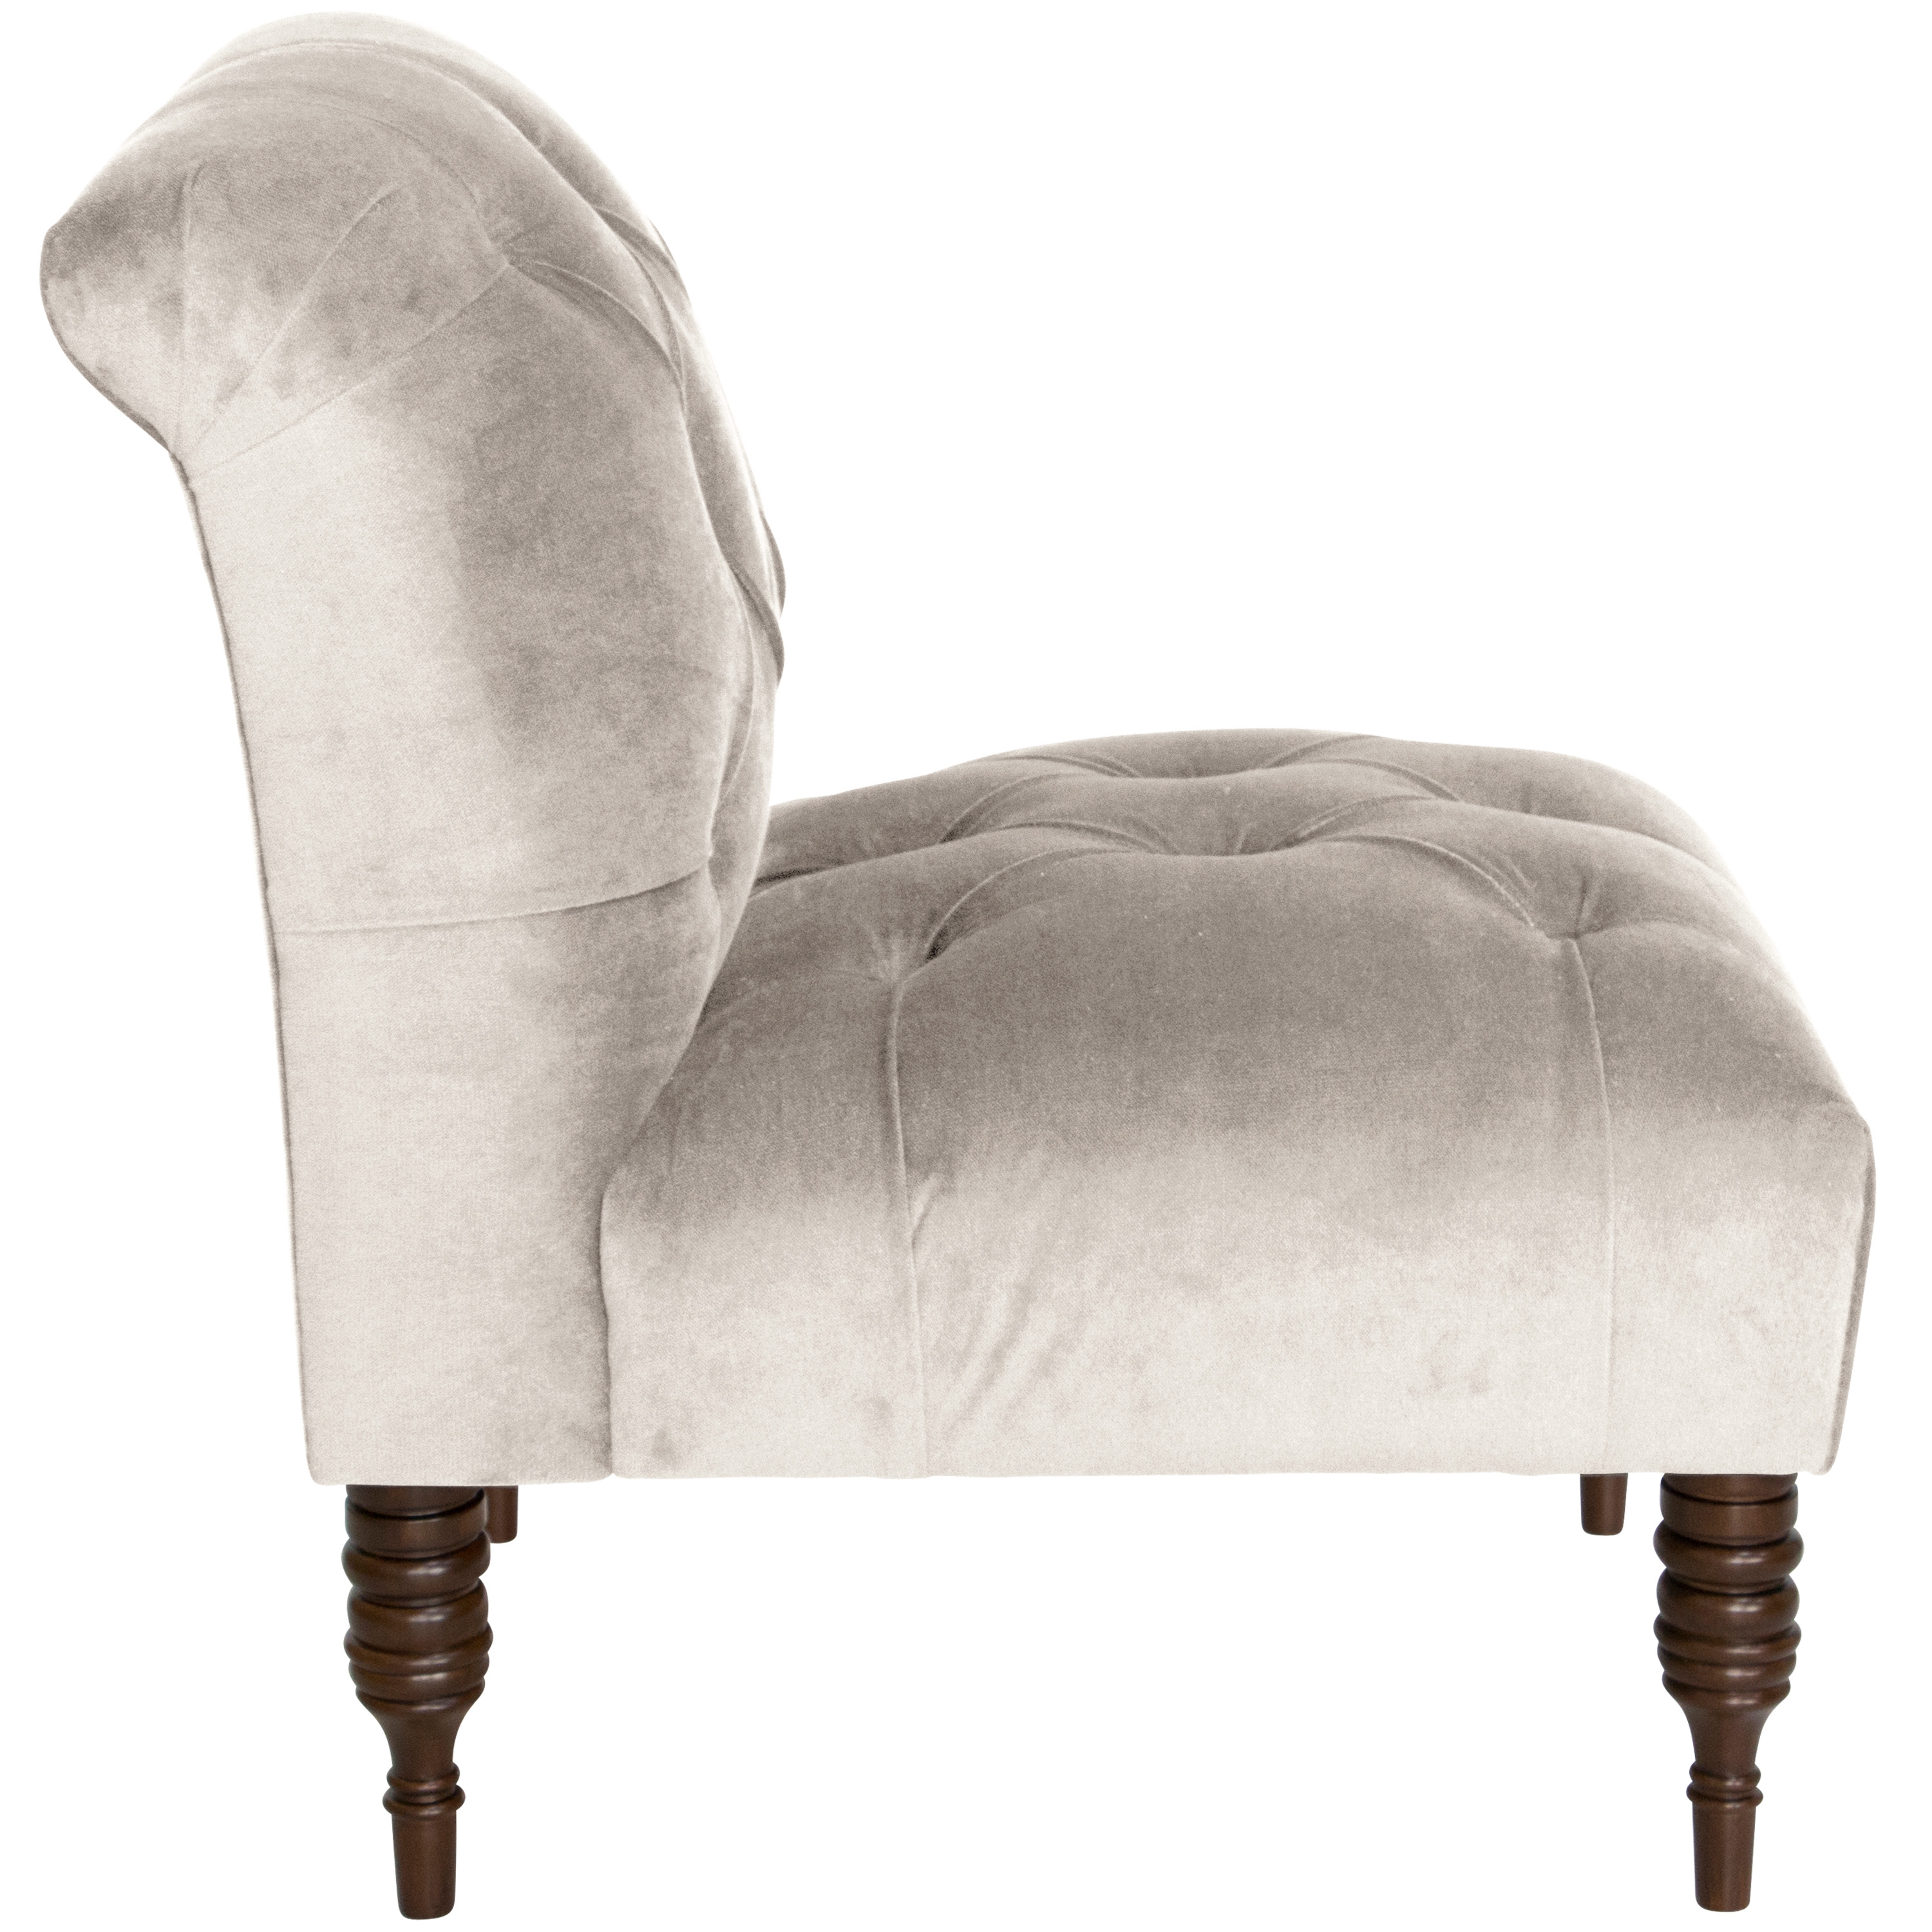 Hyde Park Chair in Mystere Dove - Image 2